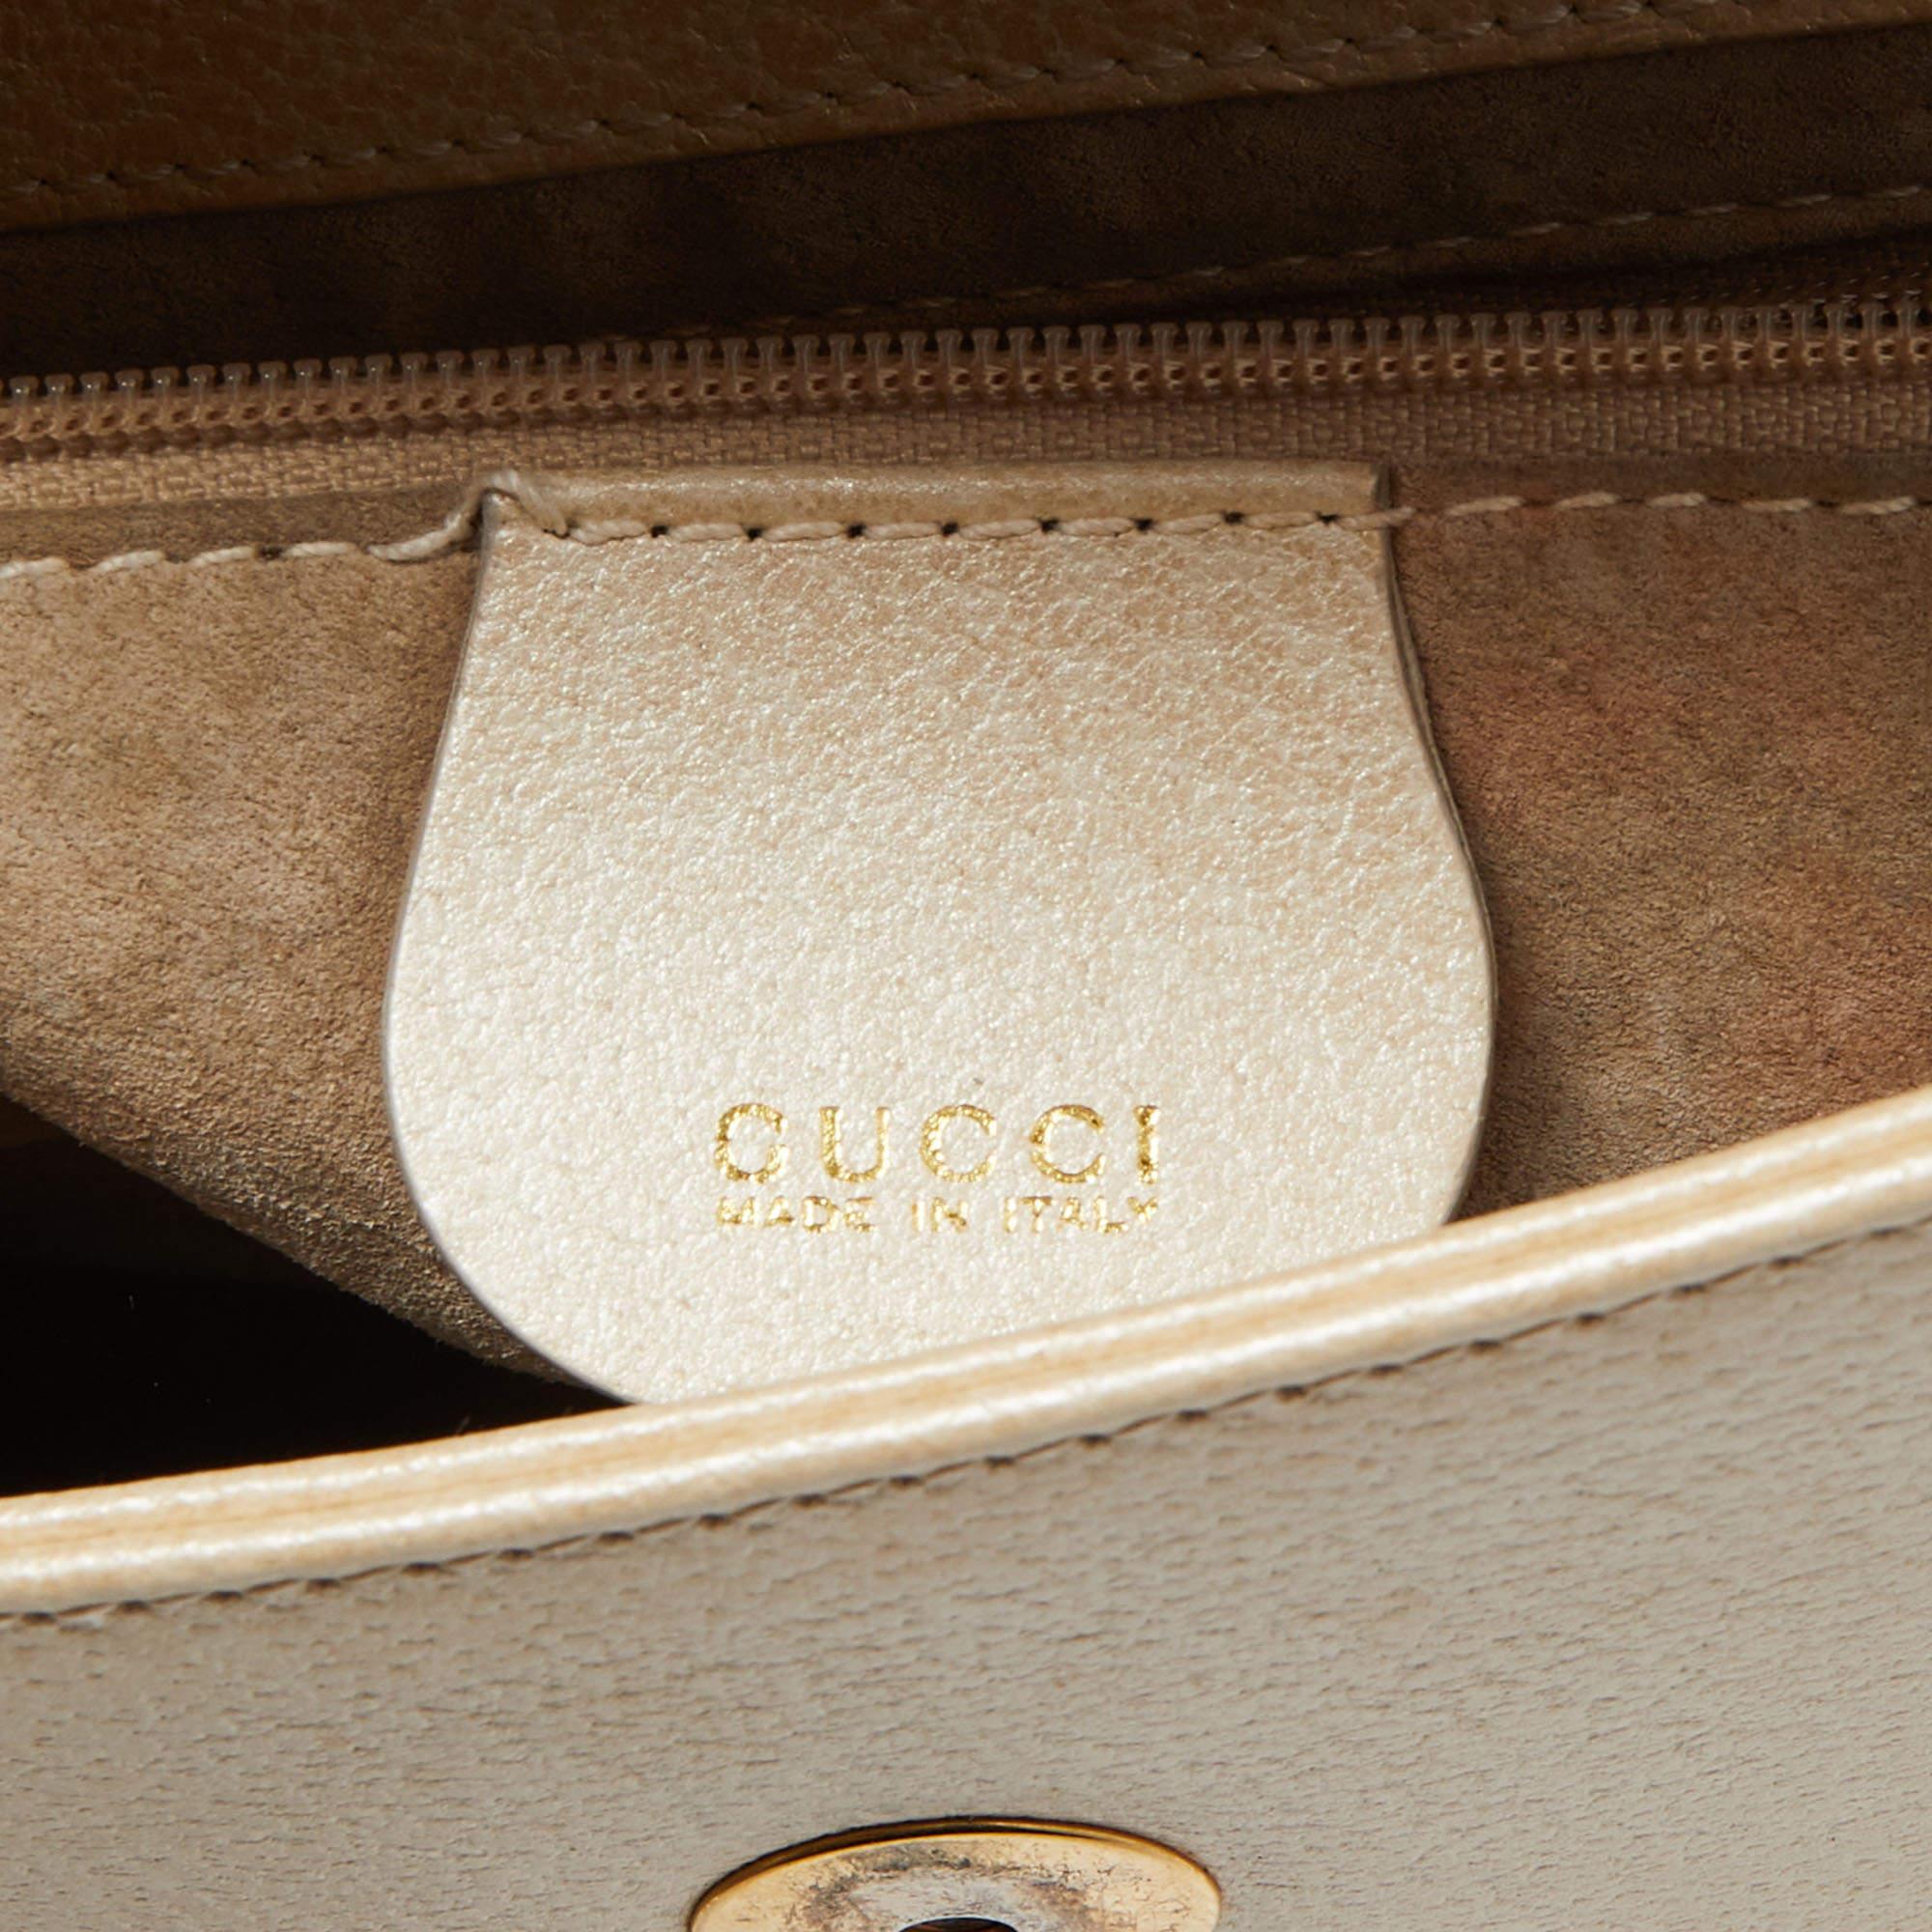 Gucci Beige Leather Bamboo Tap Handle Bag For Sale 5